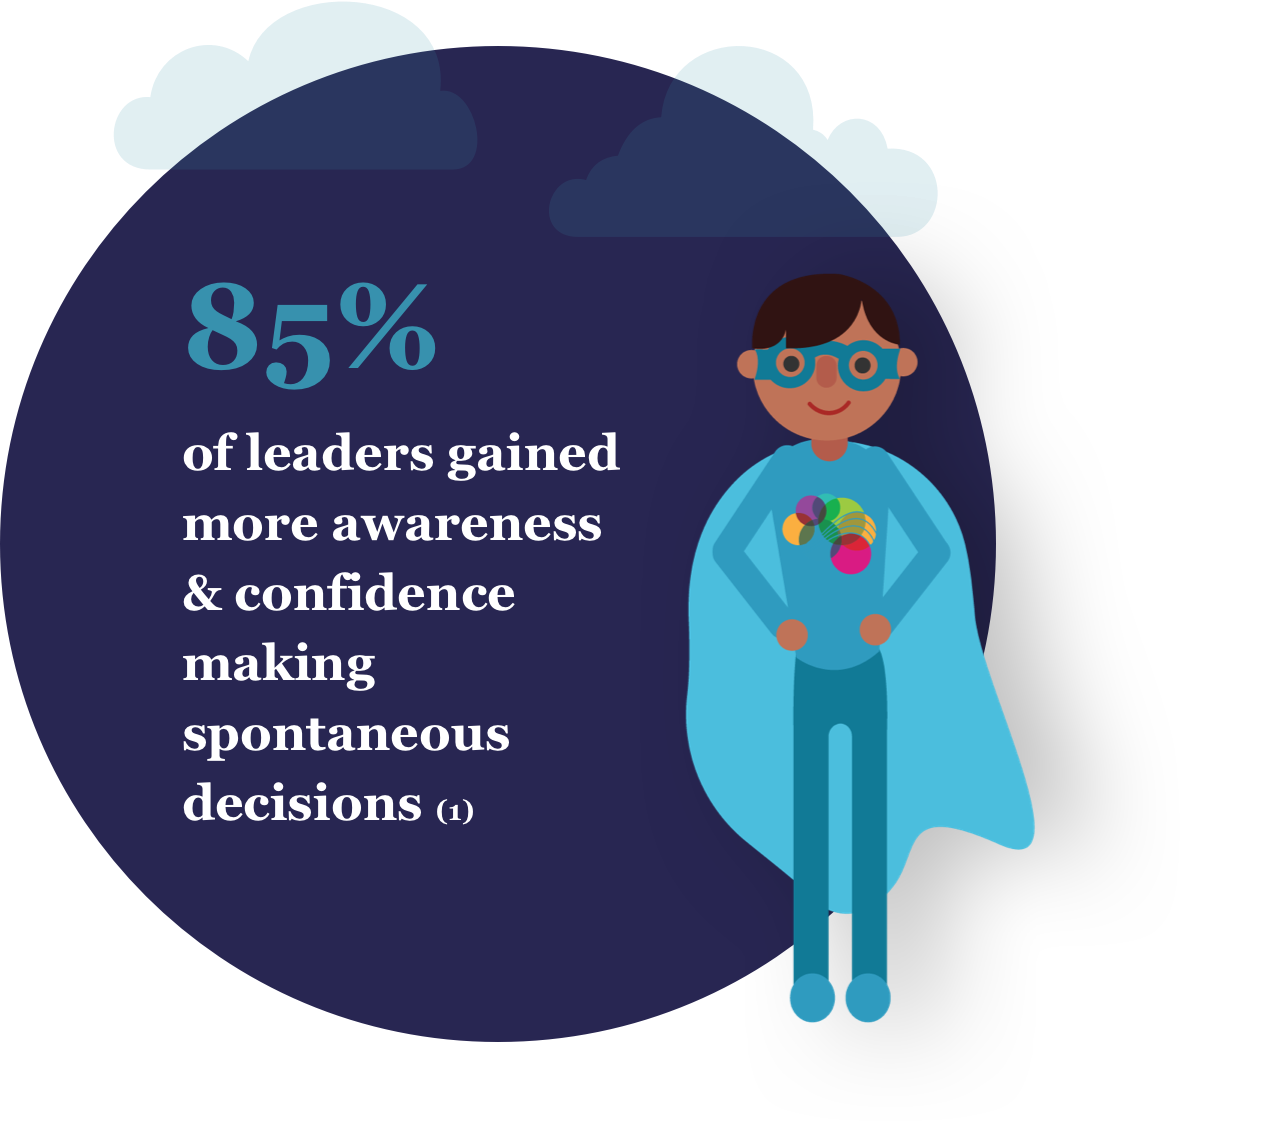 85% of leaders gained more awareness & confidence making spontaneous decisions